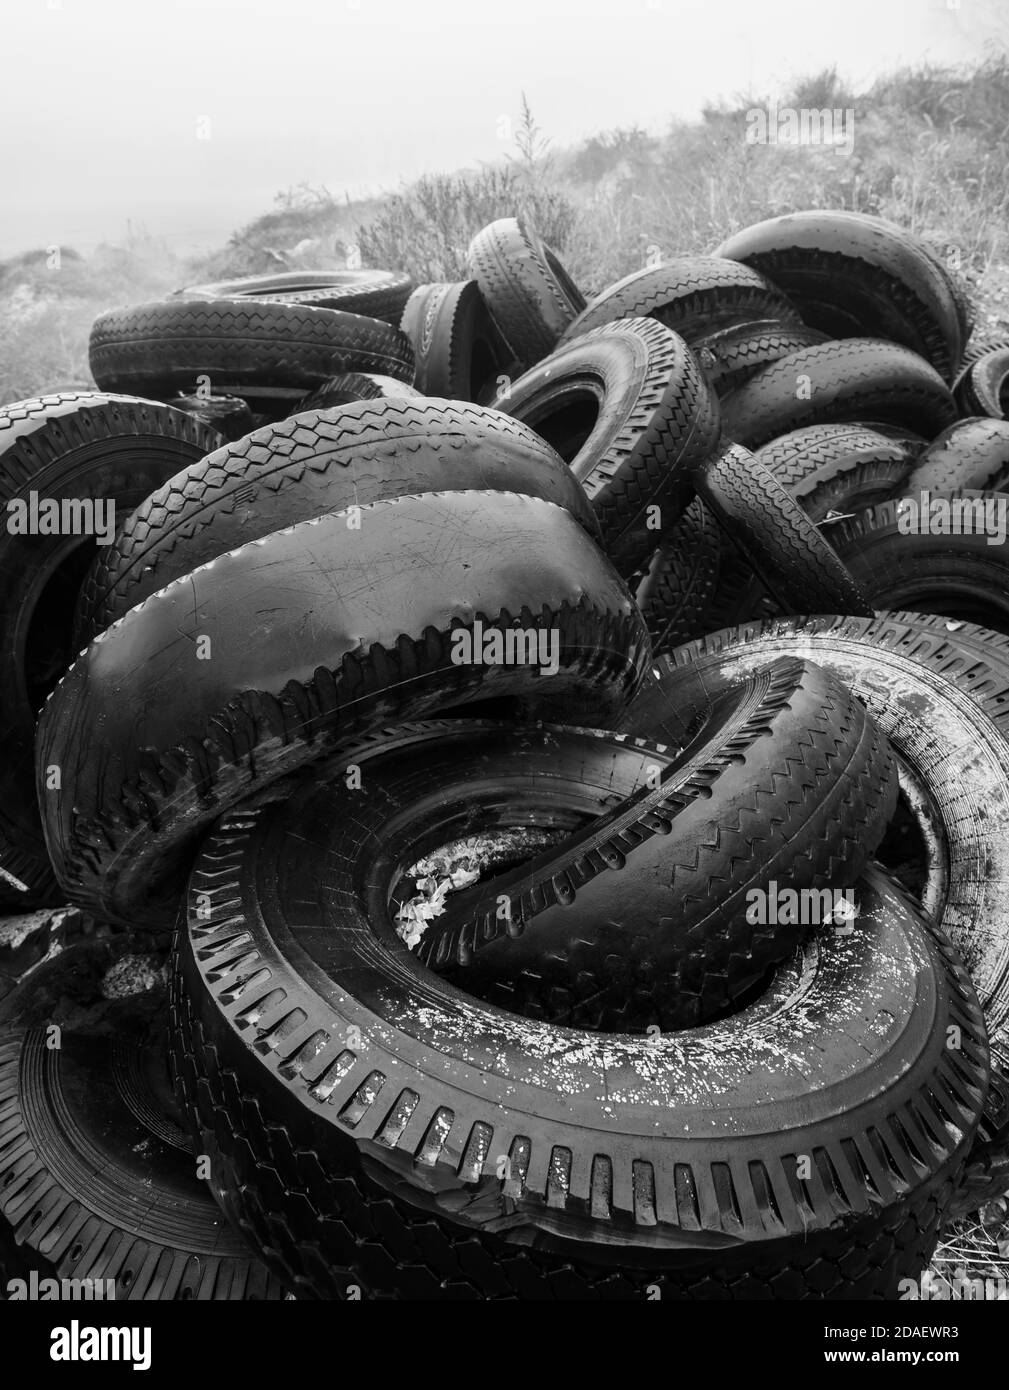 Ecological concept. Heap of old tires. Dump of old used tires in the city on a foggy autumn day Stock Photo